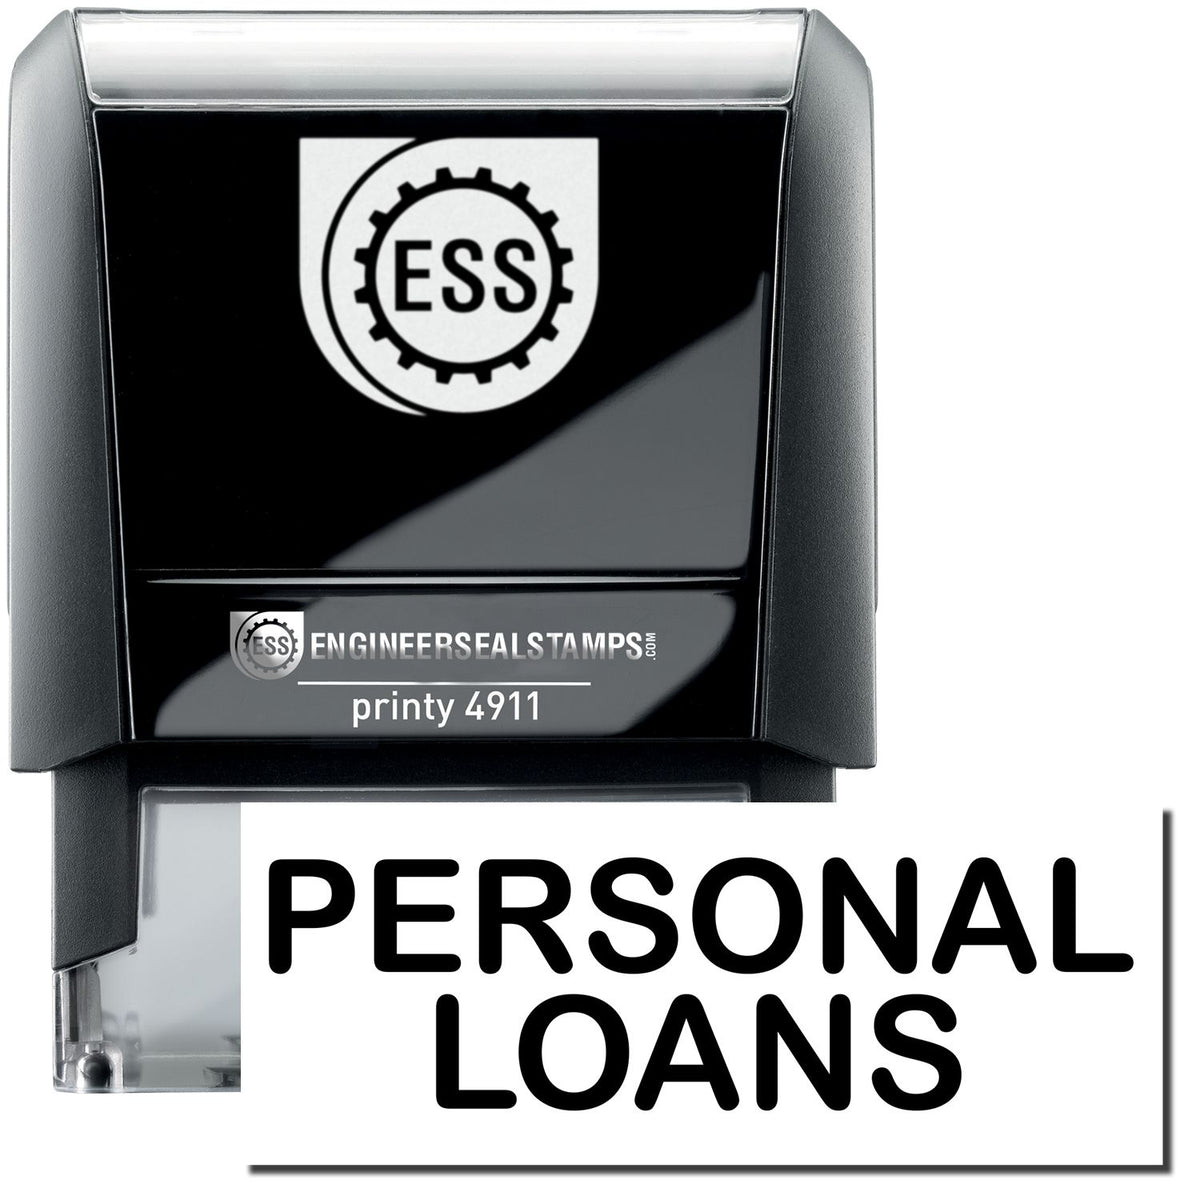 A self-inking stamp with a stamped image showing how the text &quot;PERSONAL LOANS&quot; is displayed after stamping.